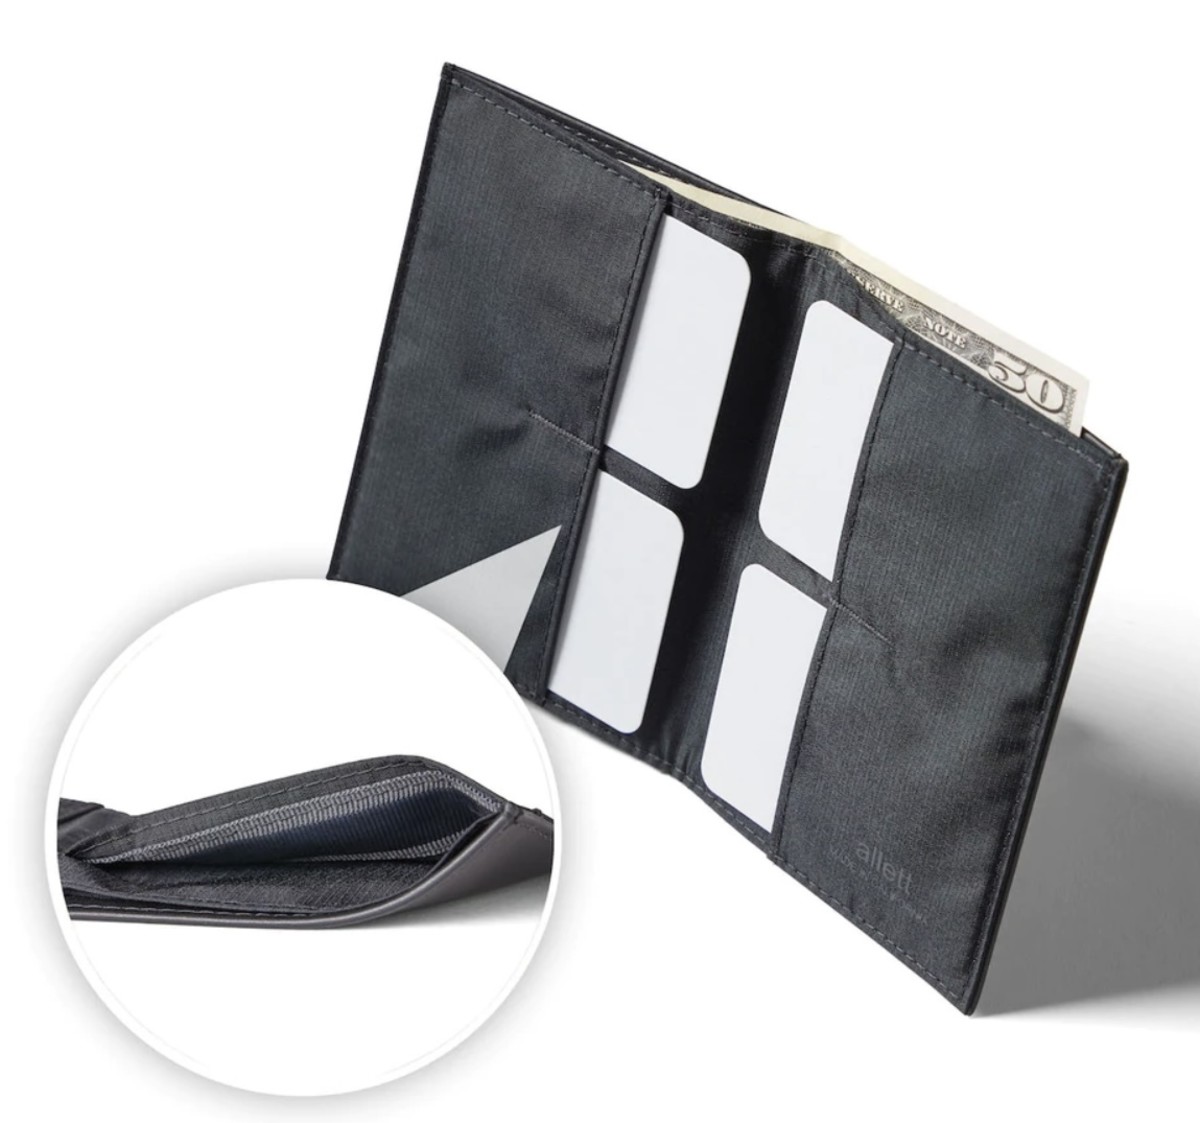 the-allett-leather-original-wallet-has-rfid-protection-and-fits-well